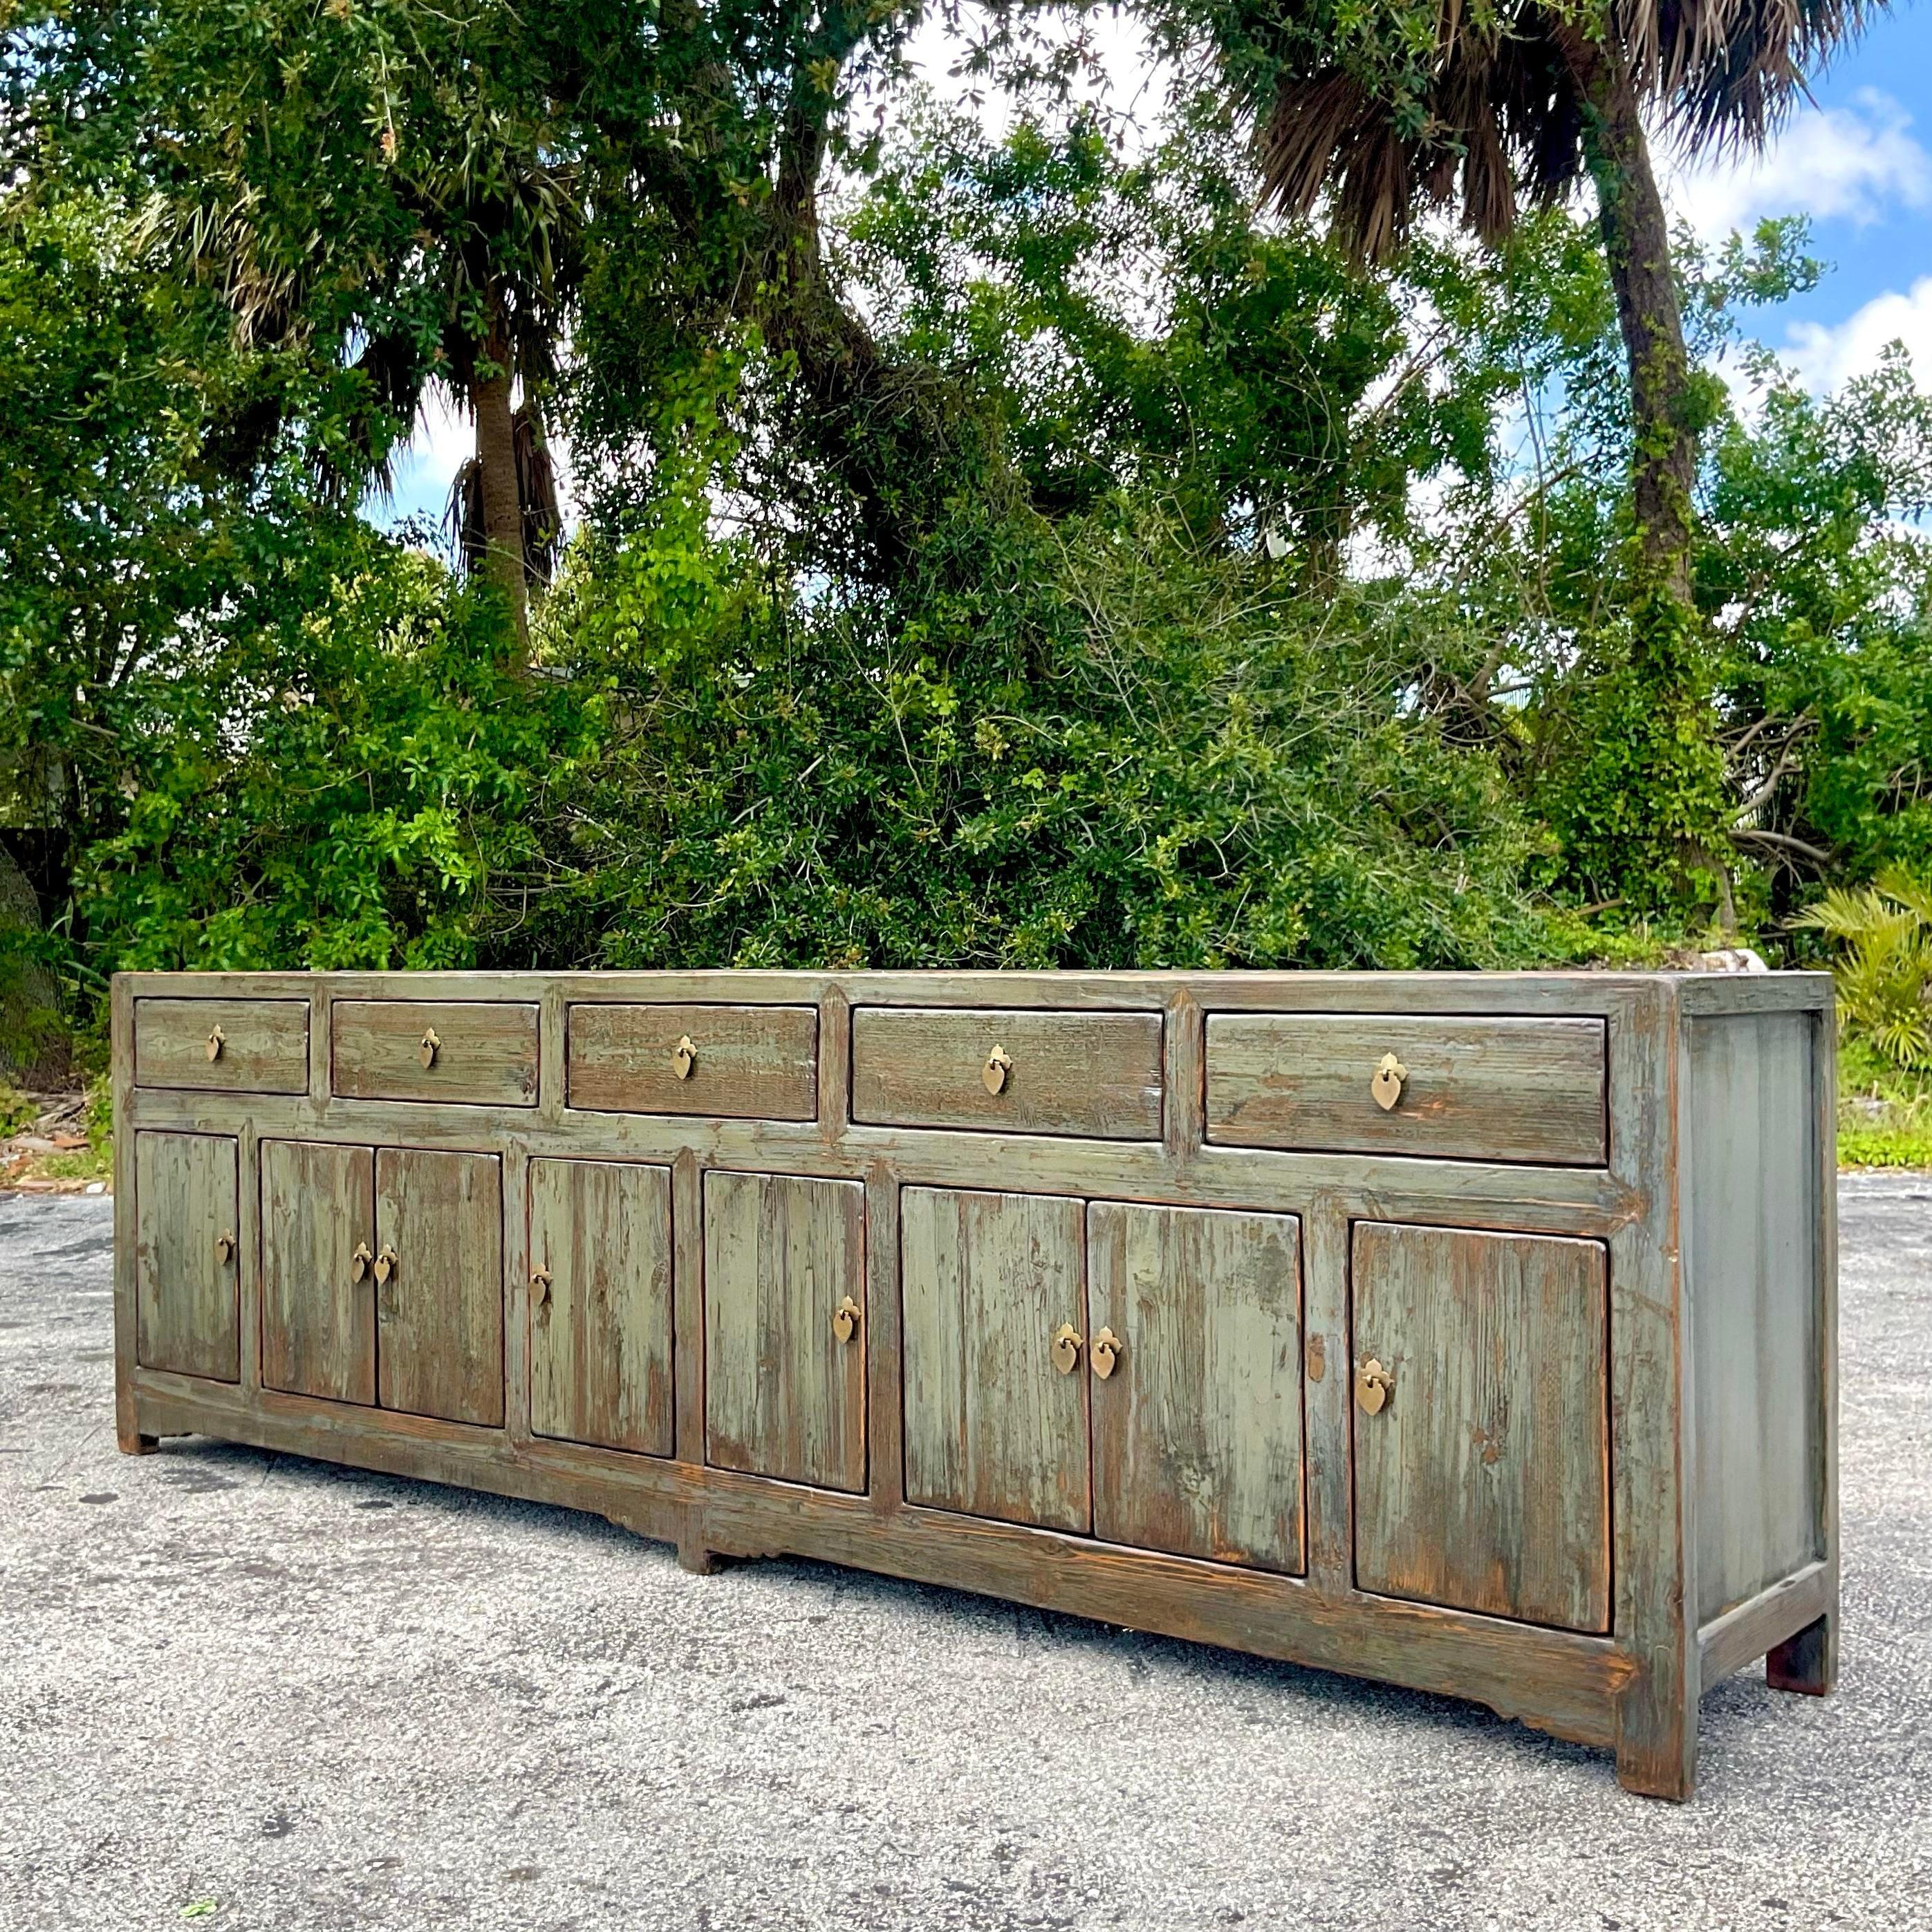 Make a bold statement in your home with our Vintage Boho Monumental Reclaimed Wood Credenza. Crafted with the soul of American craftsmanship and the free spirit of Bohemian design, this piece combines the grandeur of reclaimed wood with intricate